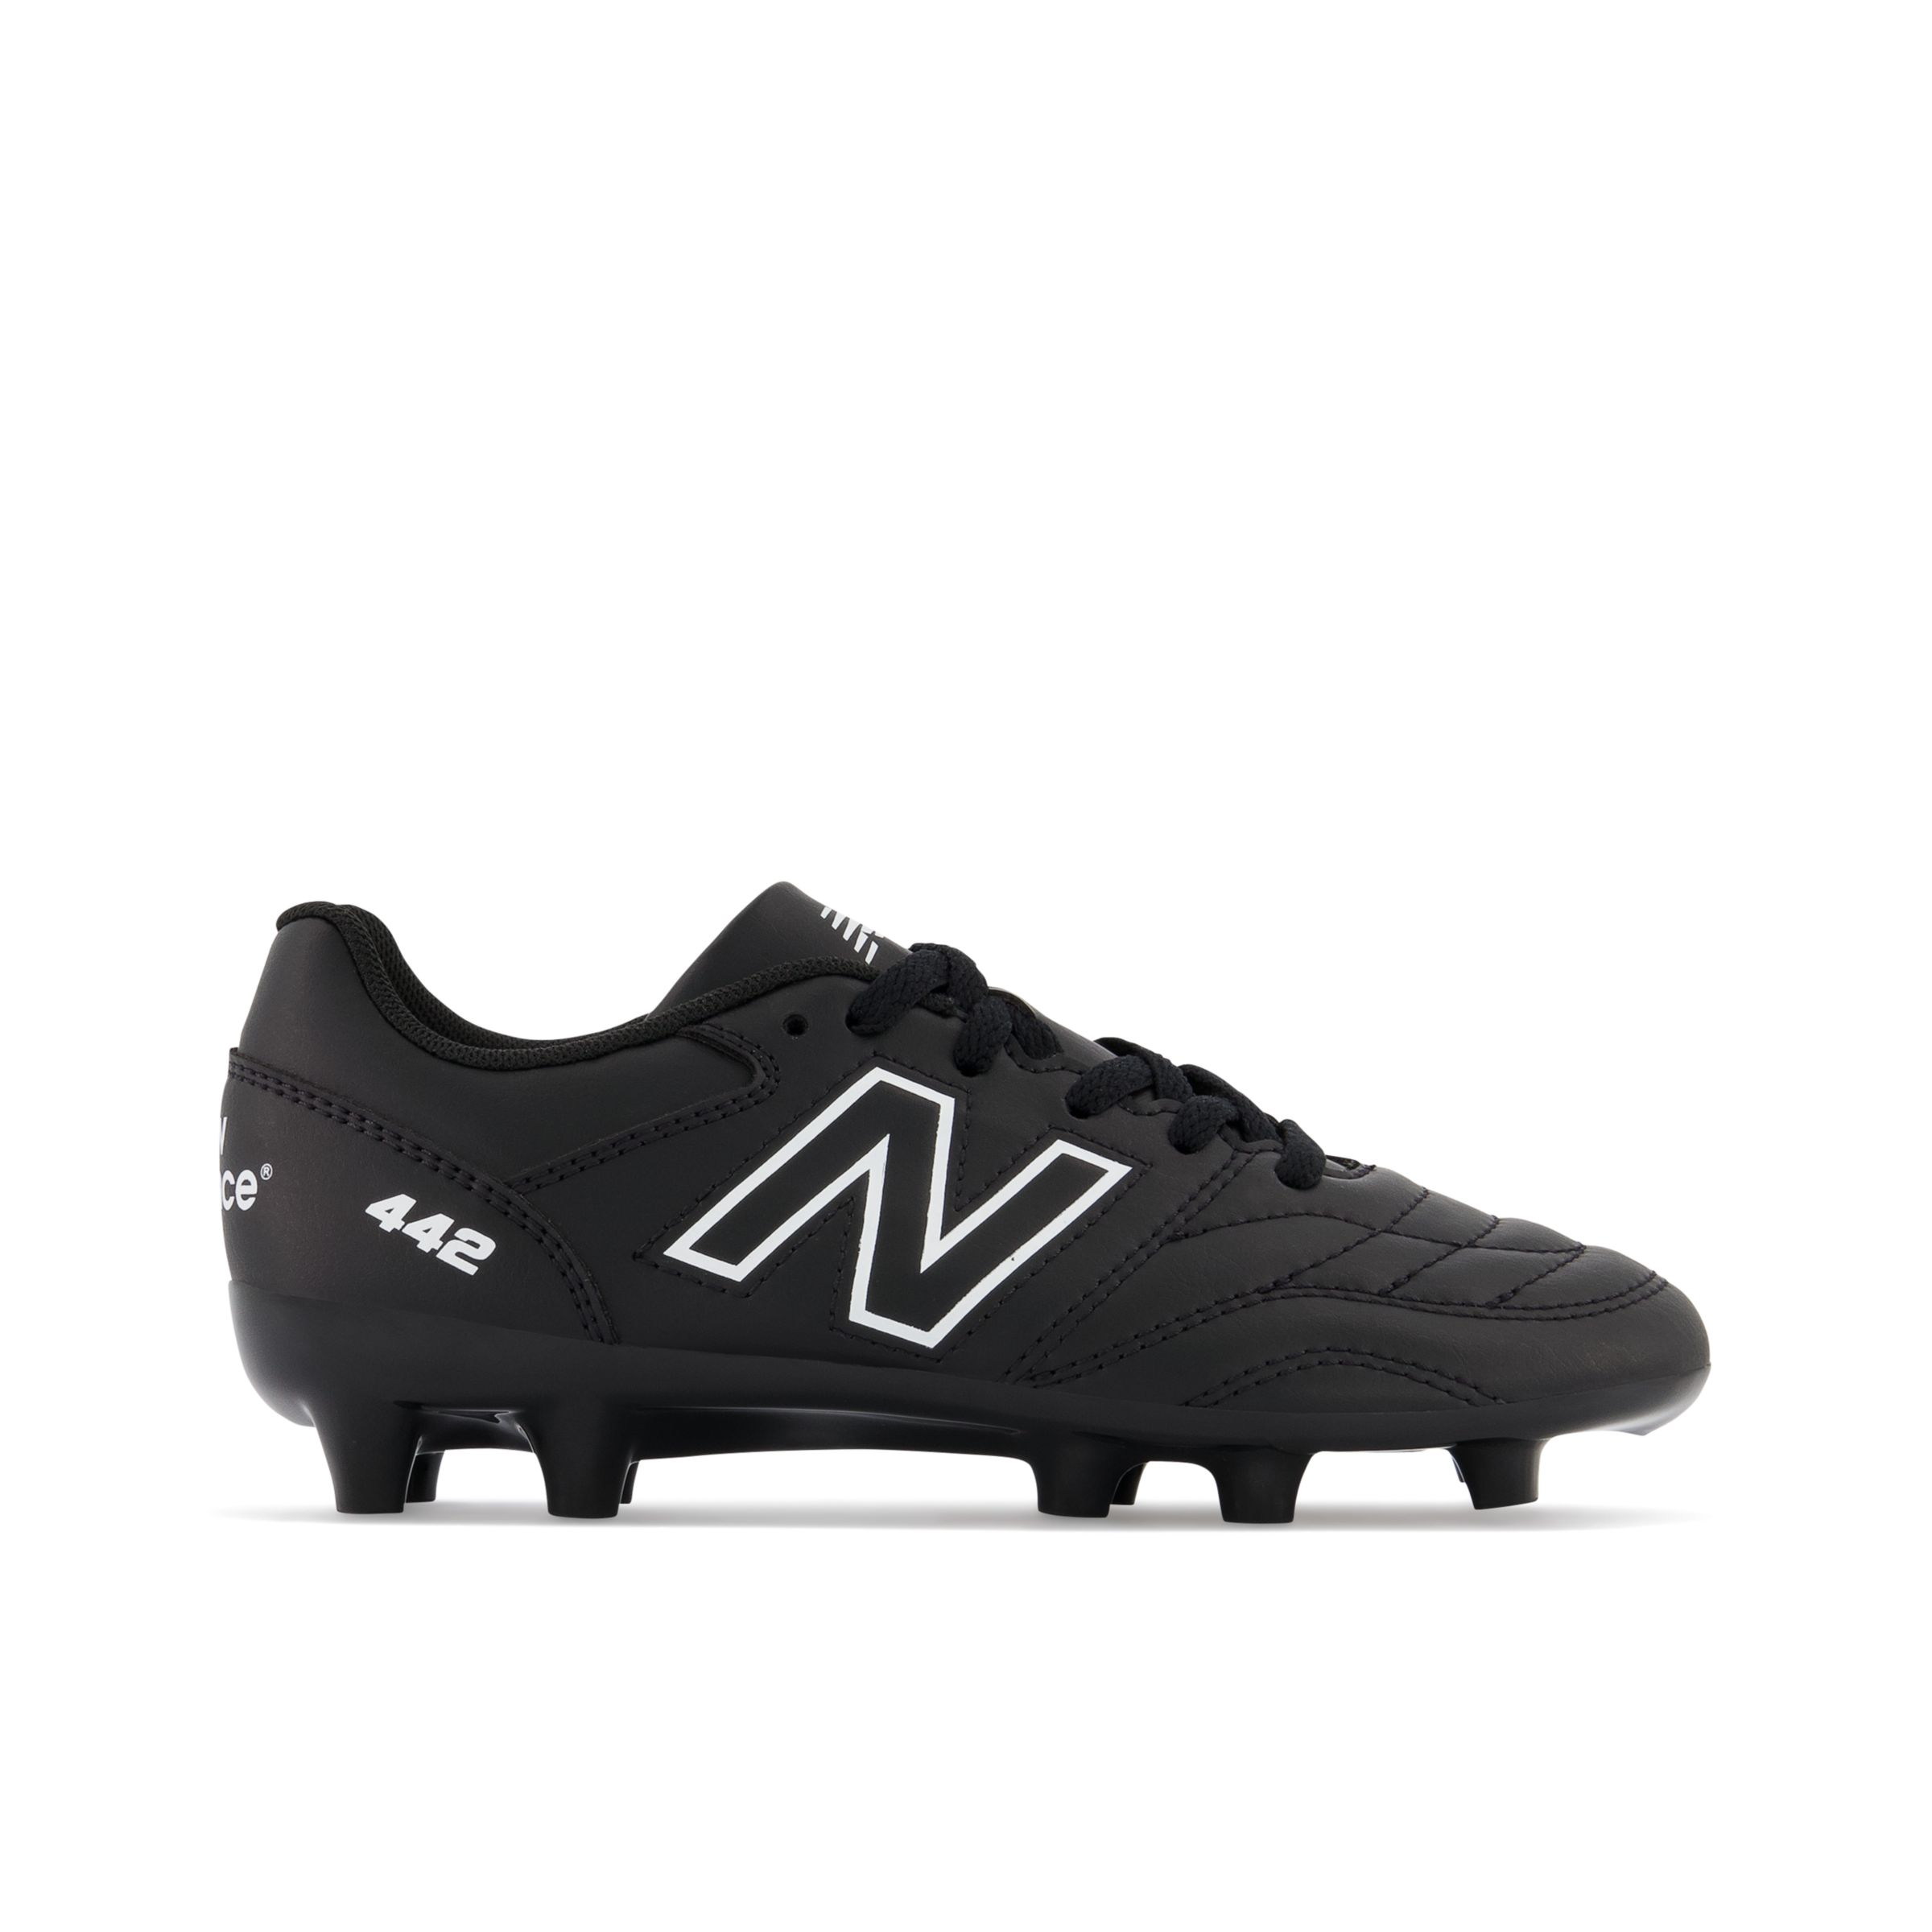 The New BEST LEATHER FOOTBALL BOOT?, New Balance 442 2.0 Pro